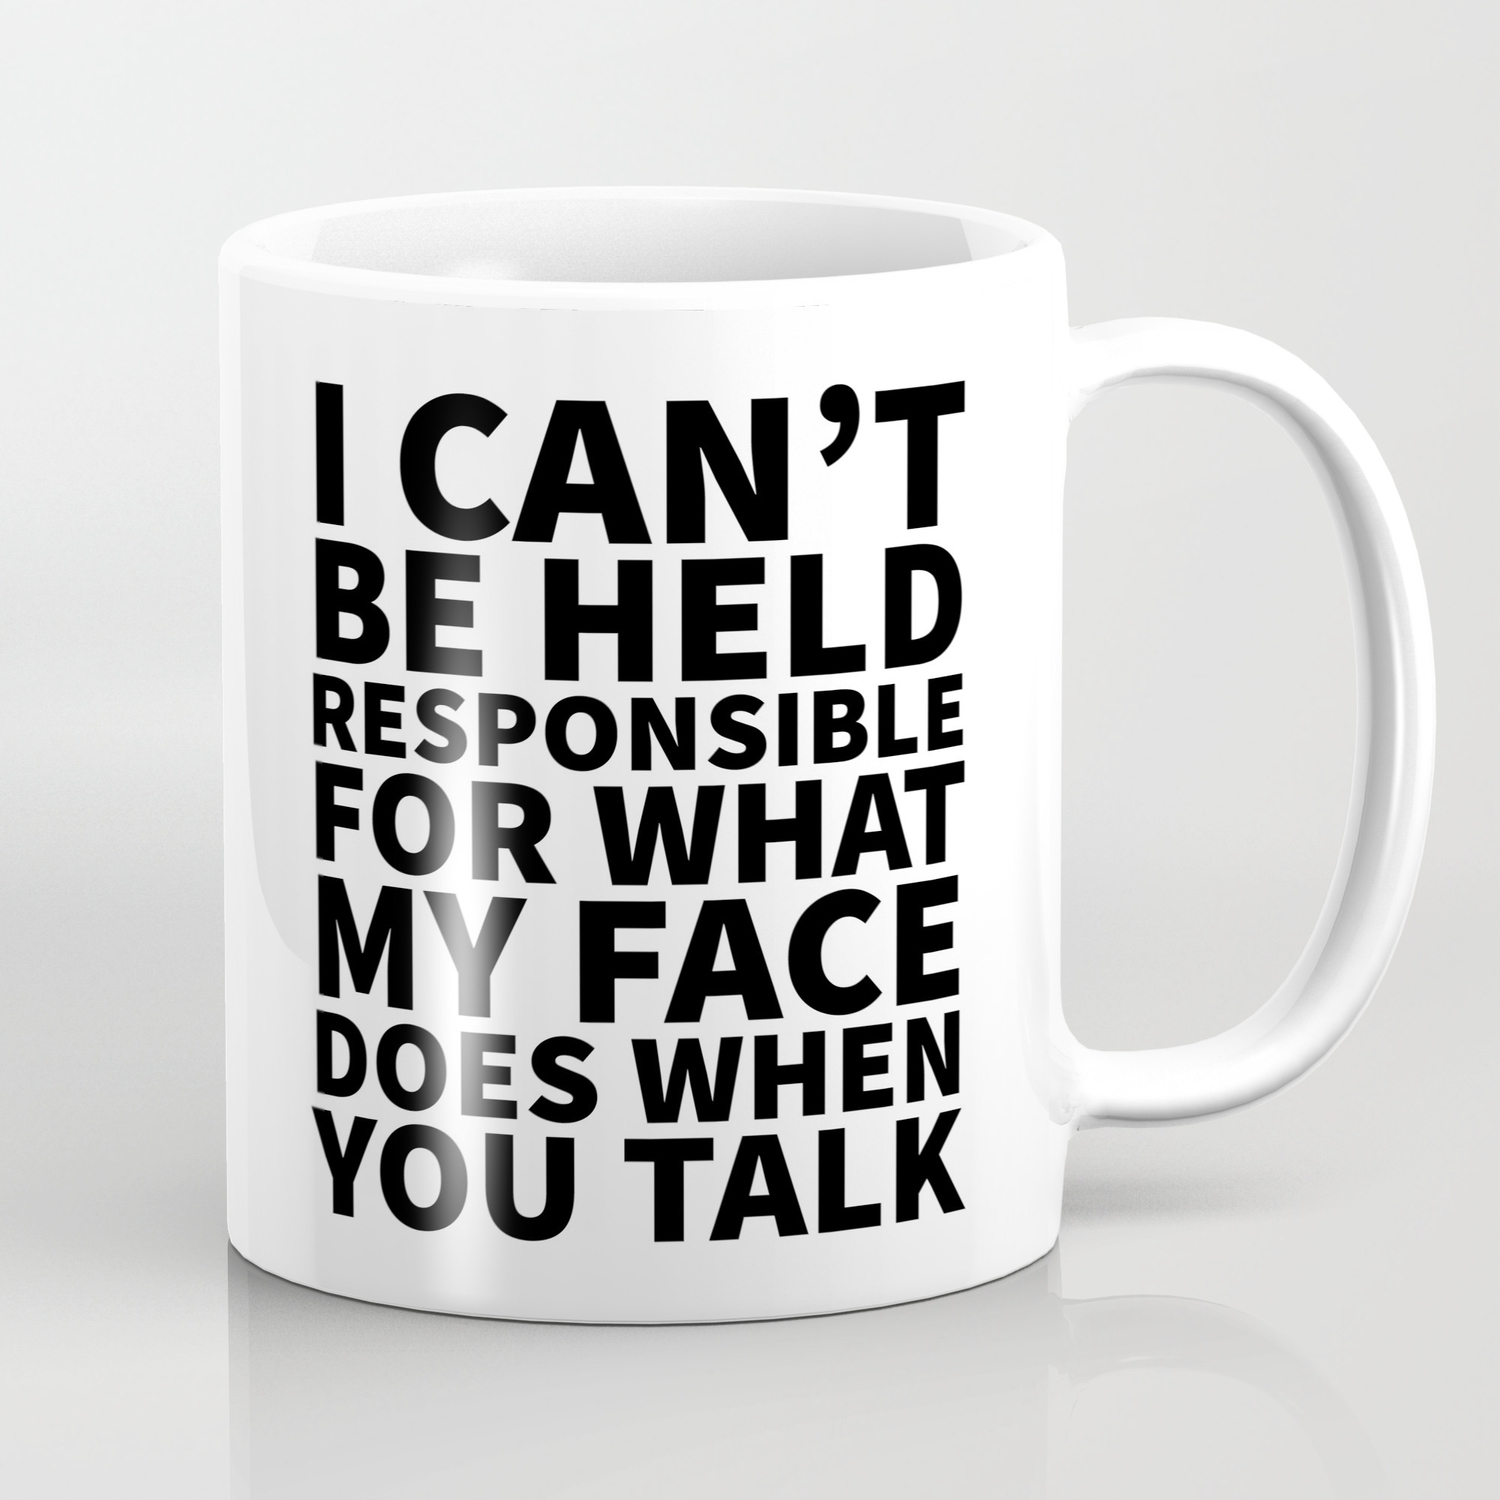 Details about   I Can't Be Held Responsible For What My Face Does When You Talk Mug 